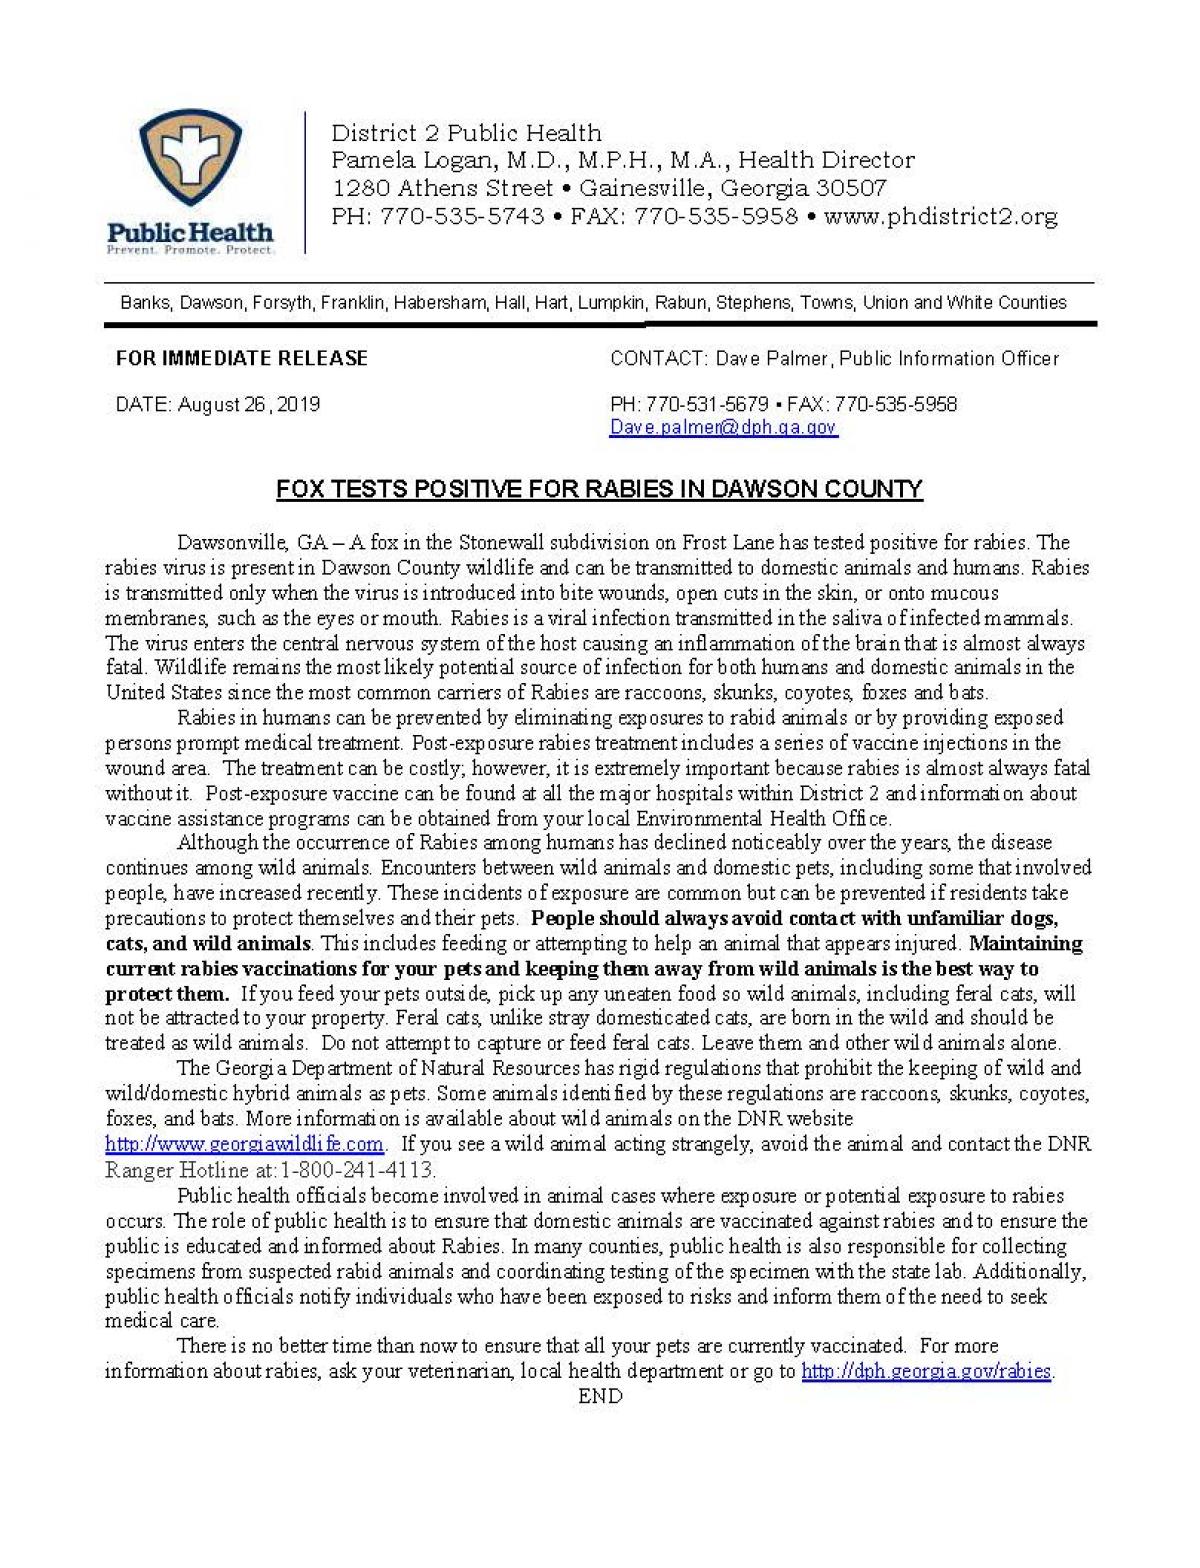 PRESS RELEASE PUBLIC HEALTH - FOX TESTS POSITIVE FOR RABIES IN DAWSON COUNTY 